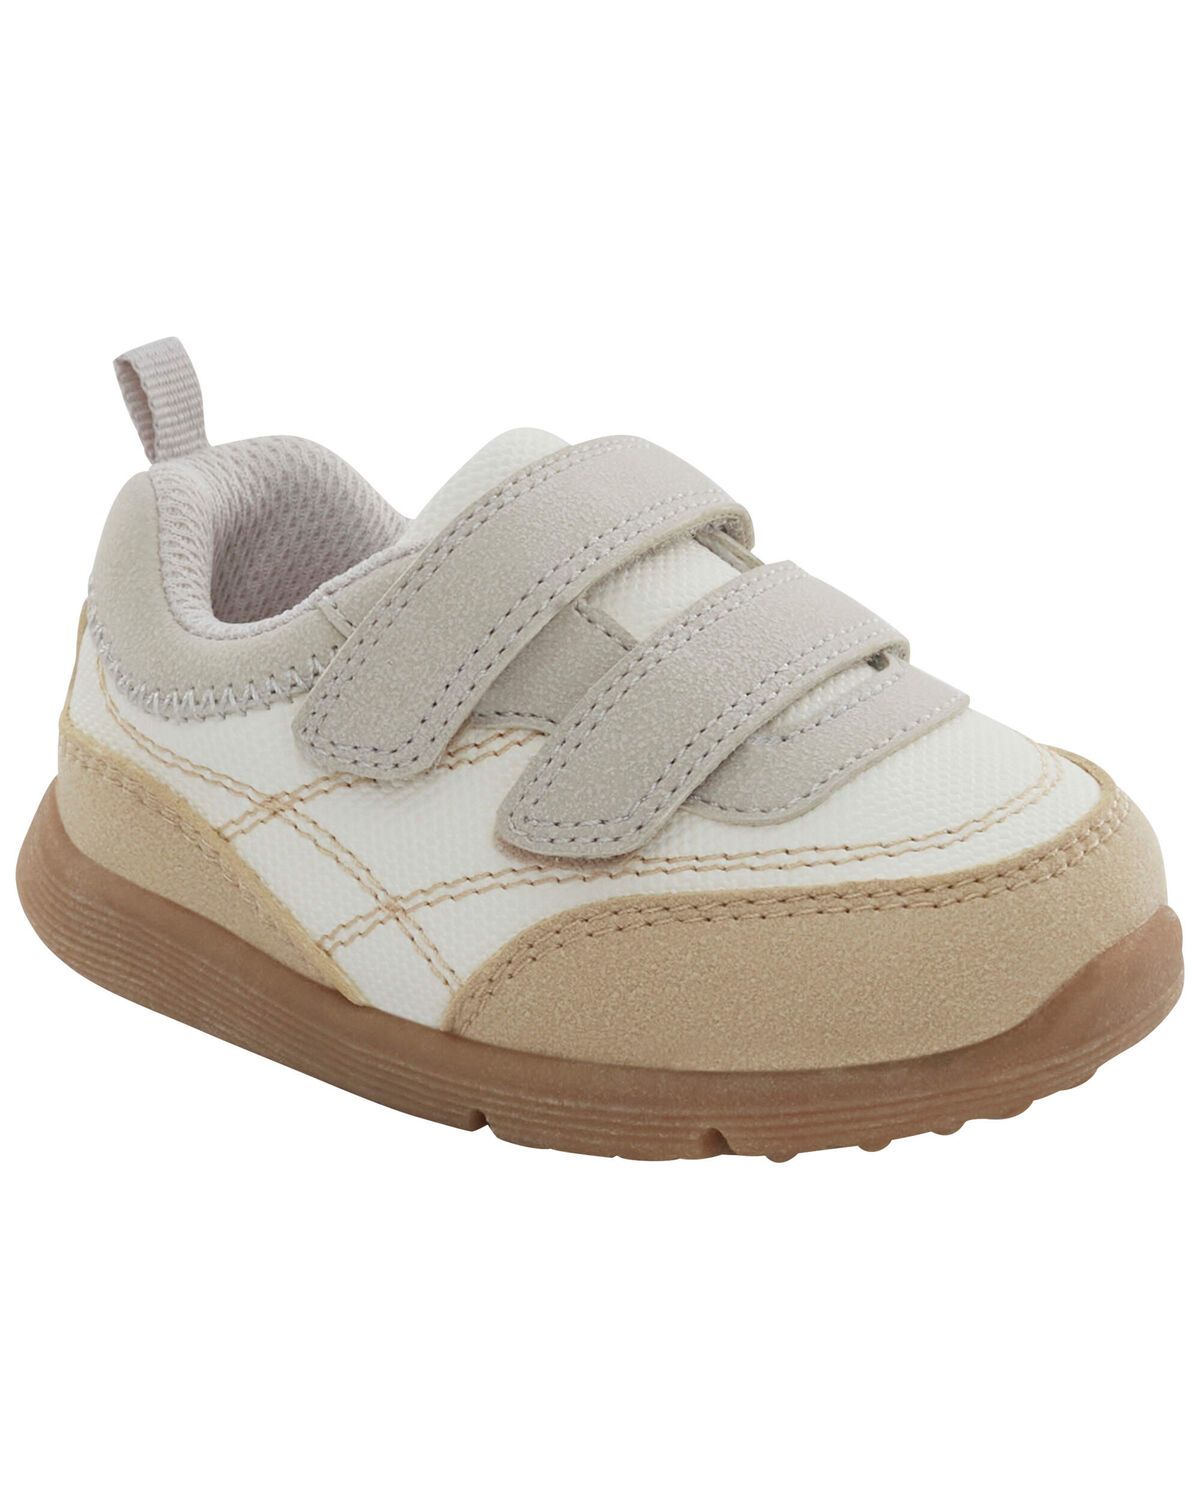 Baby Every Step Casual Sneakers | Carter's